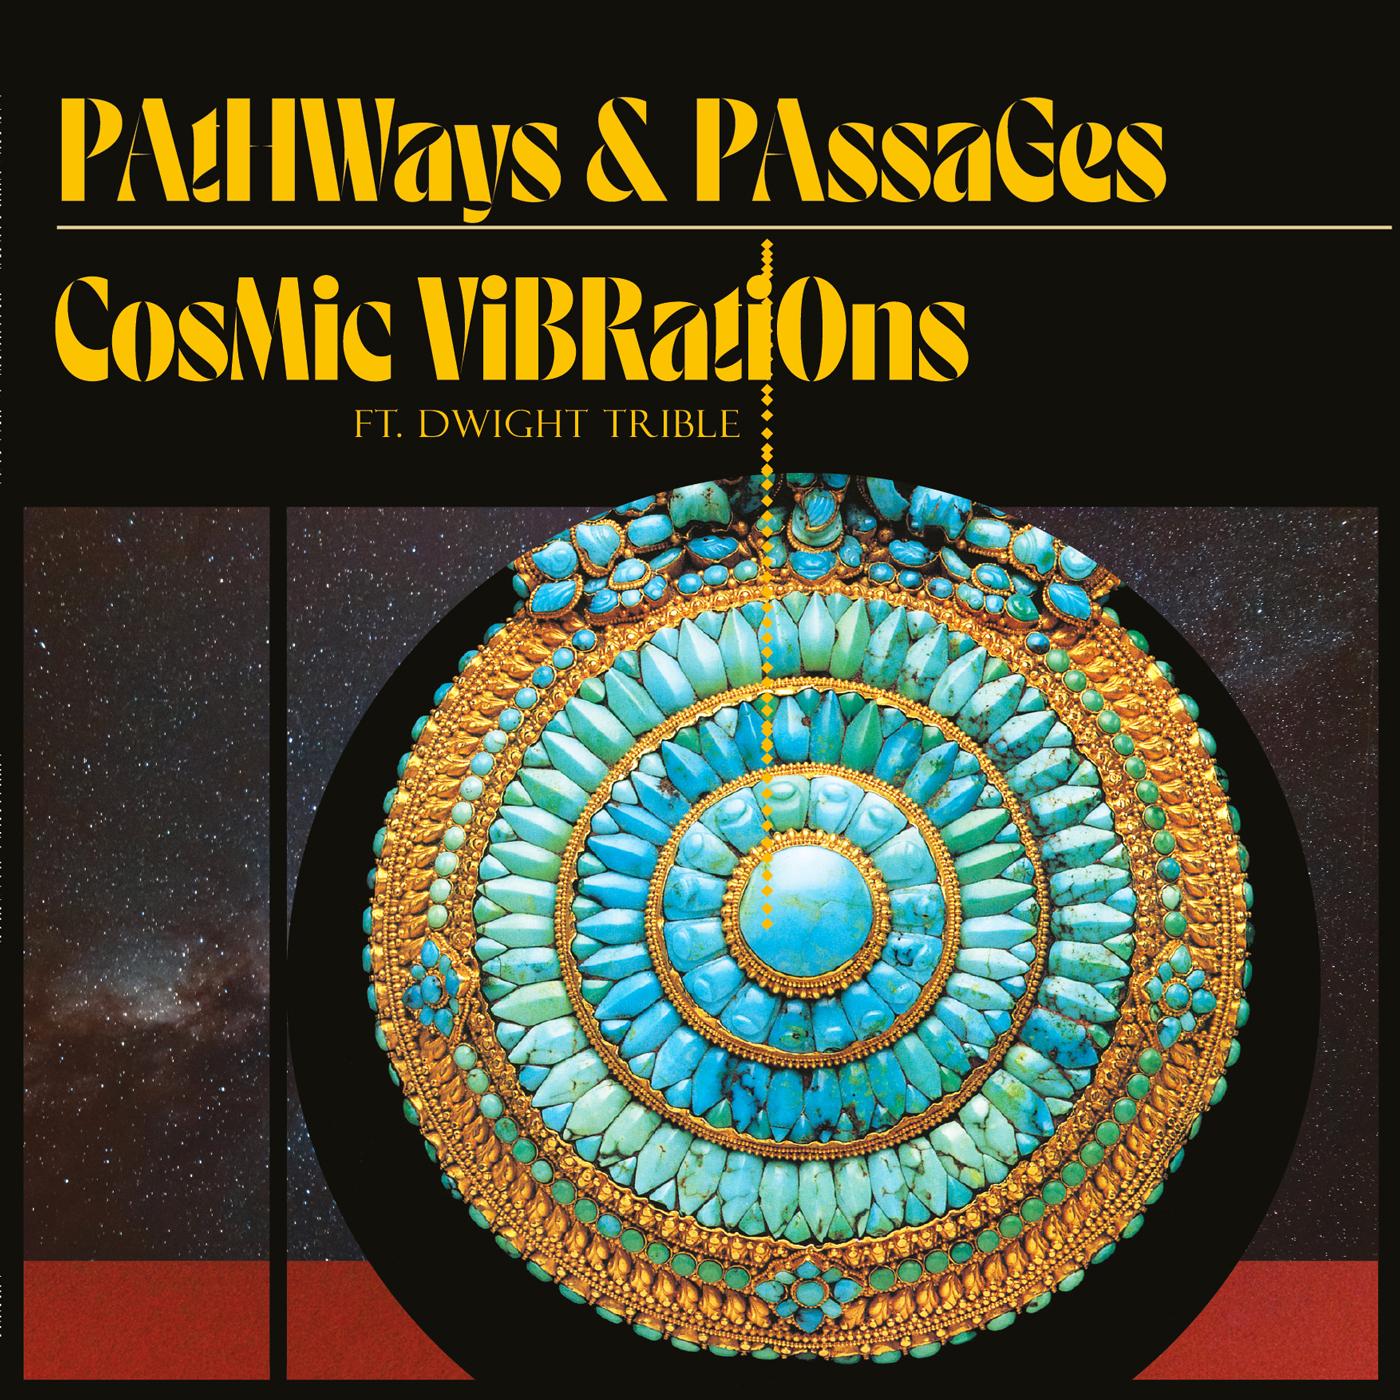 Cosmic Vibrations and Dwight Trible | Pathways & Passages | Vinyl